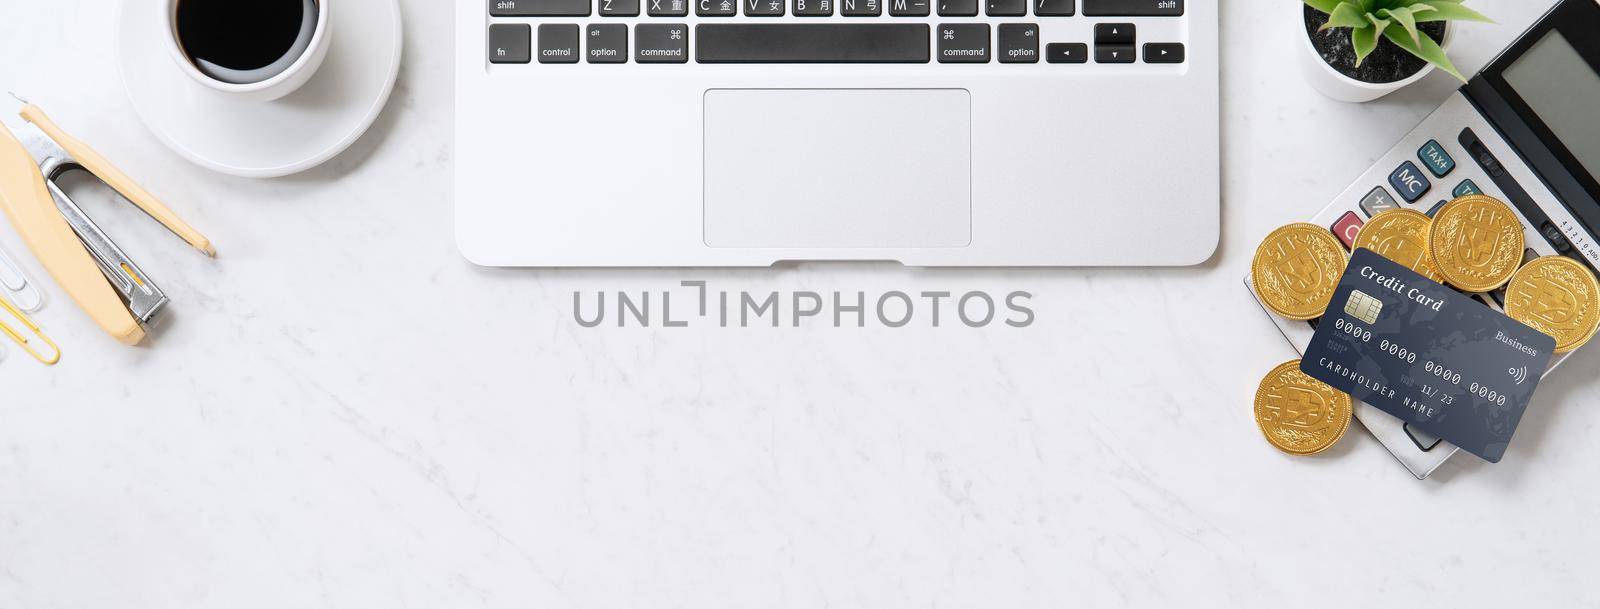 Concept of online payment with credit card with smart phone, laptop computer on office desk on clean bright marble table background, top view, flat lay by ROMIXIMAGE